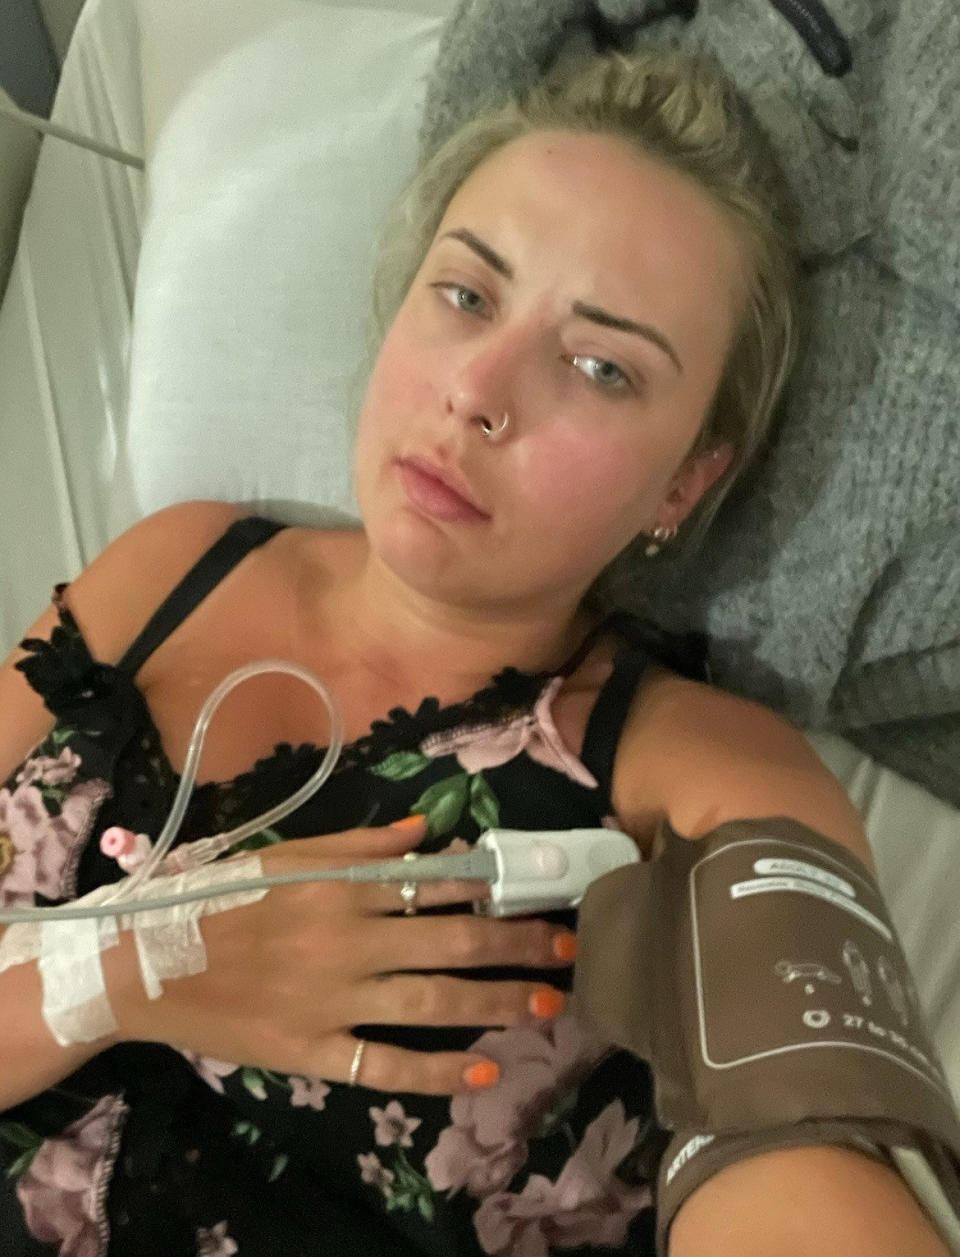 Amy Thomson was rushed to hospital after being stung by a venomous fish while on honeymoon in Mauritius (SWNS)